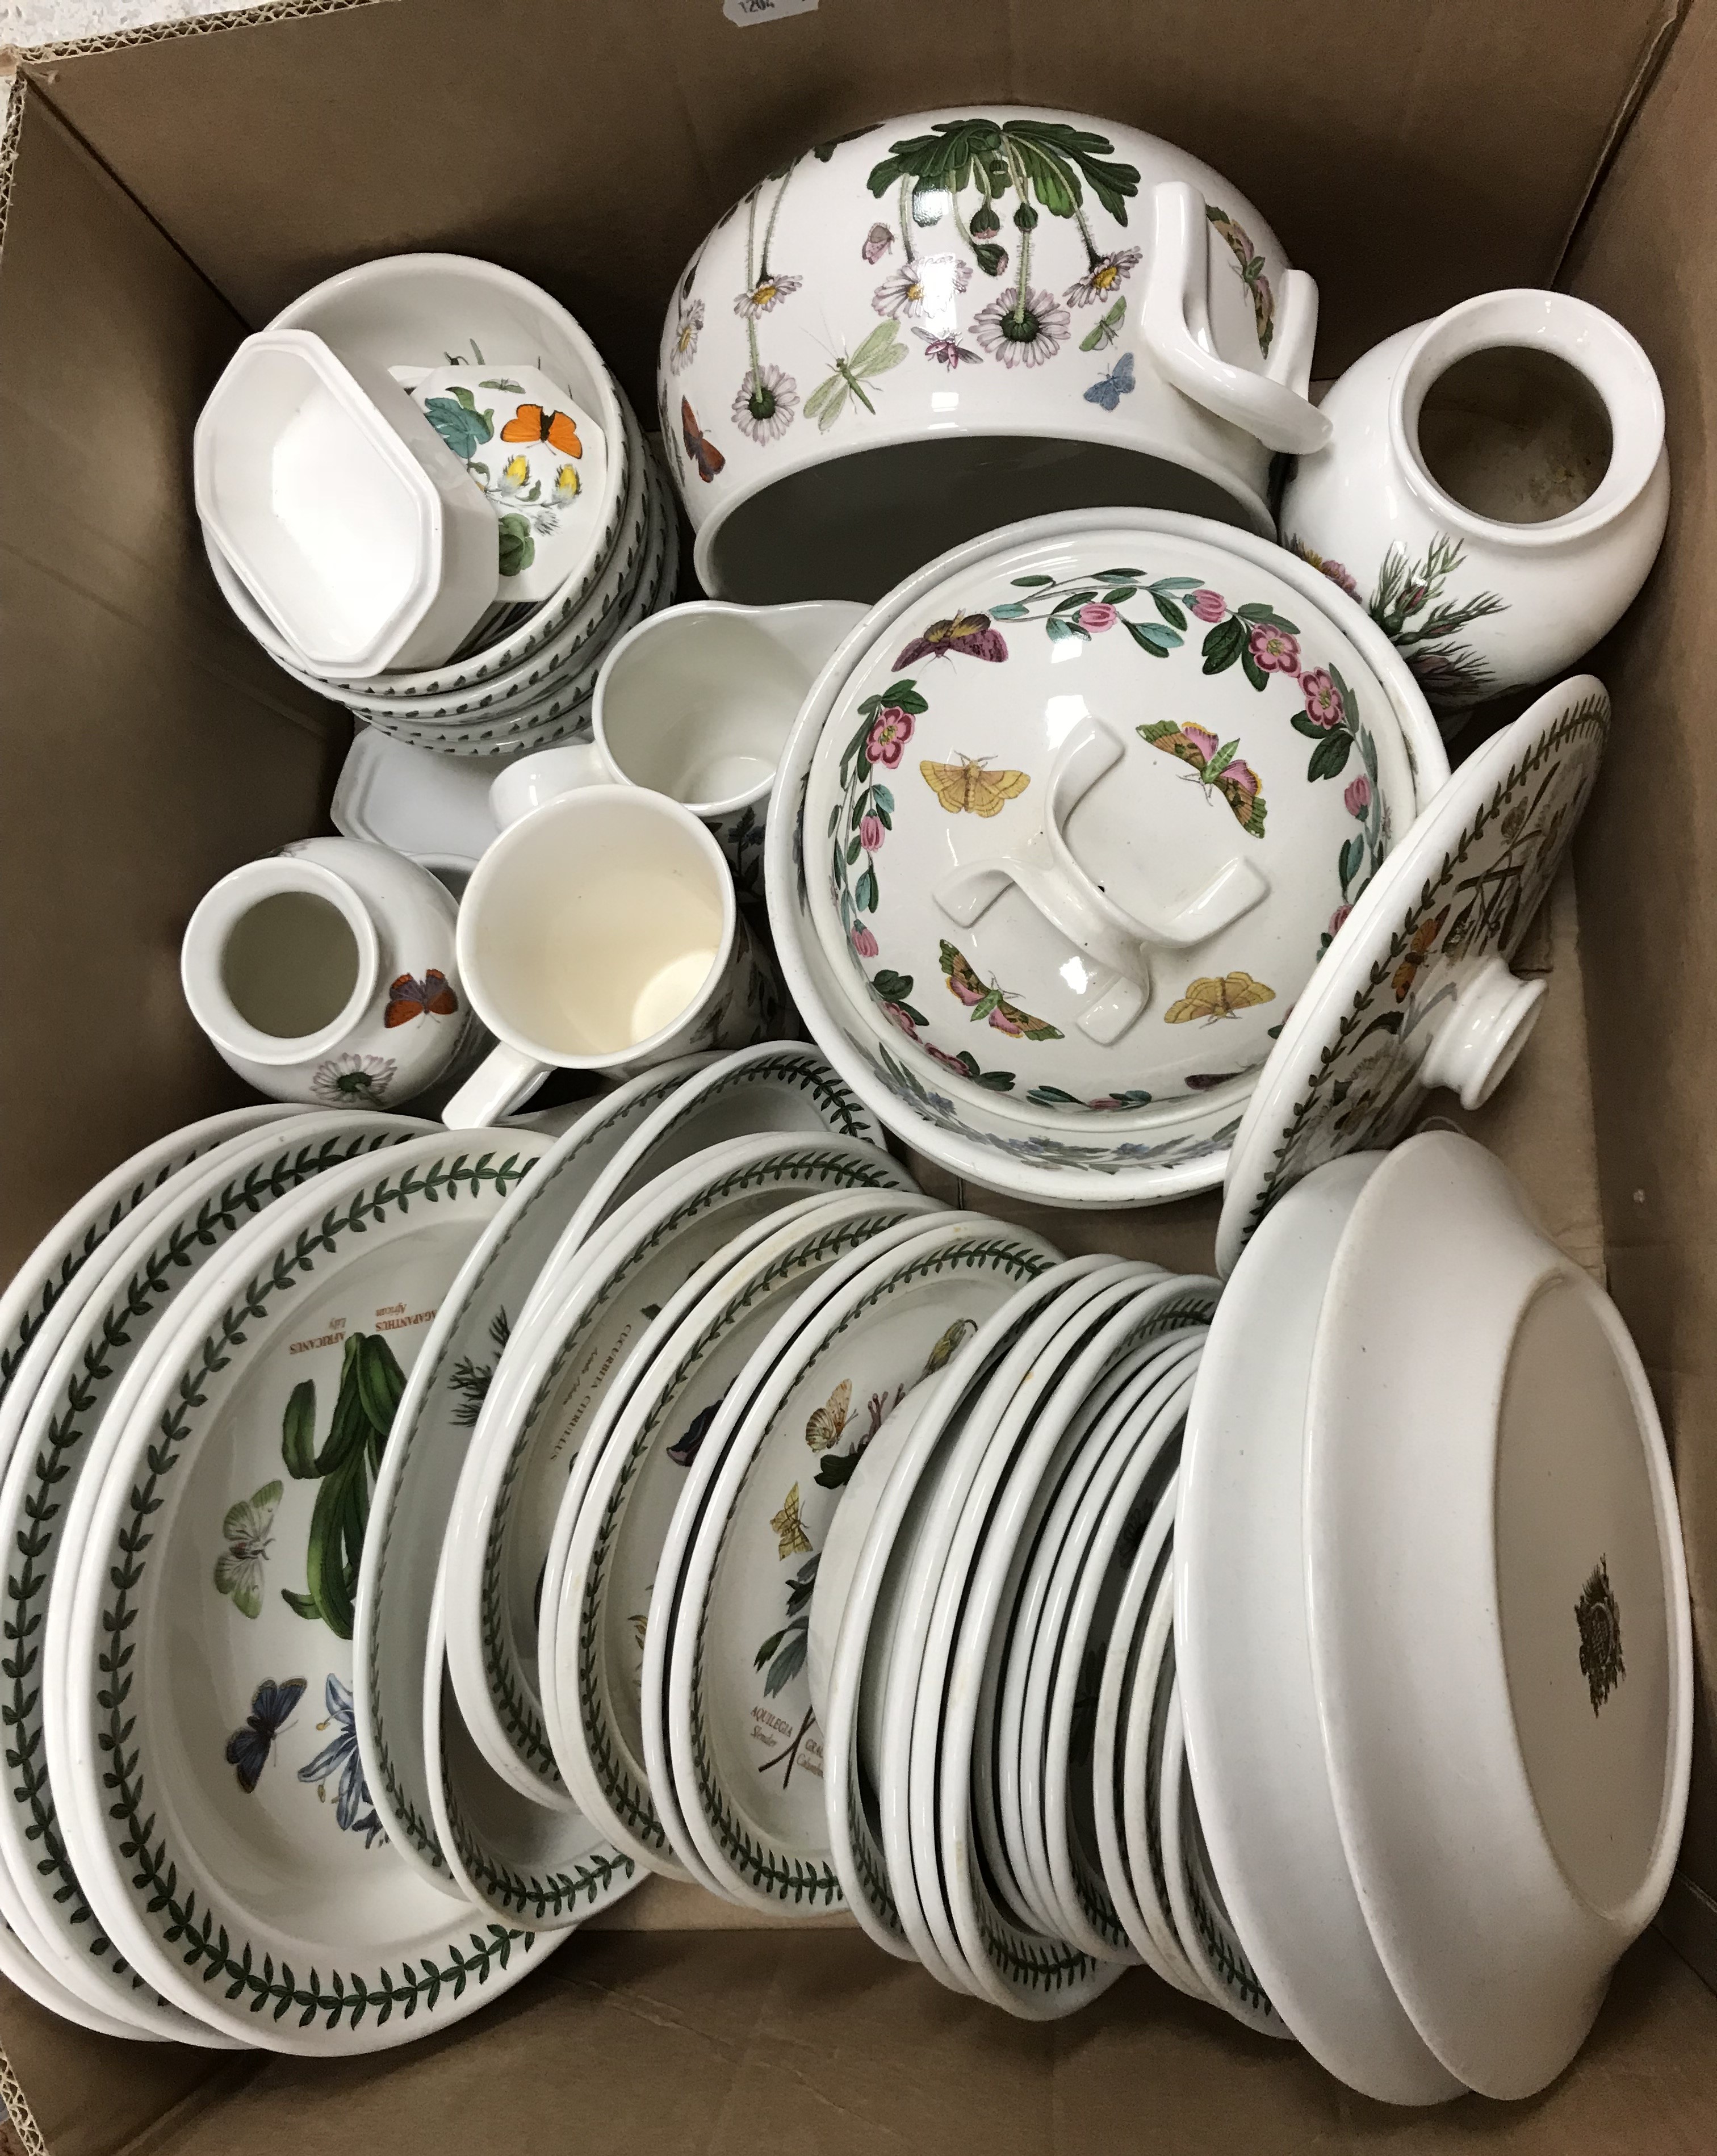 Five boxes of Portmeirion "Botanic Garden" china wares to include plates, serving bowls, - Image 5 of 6